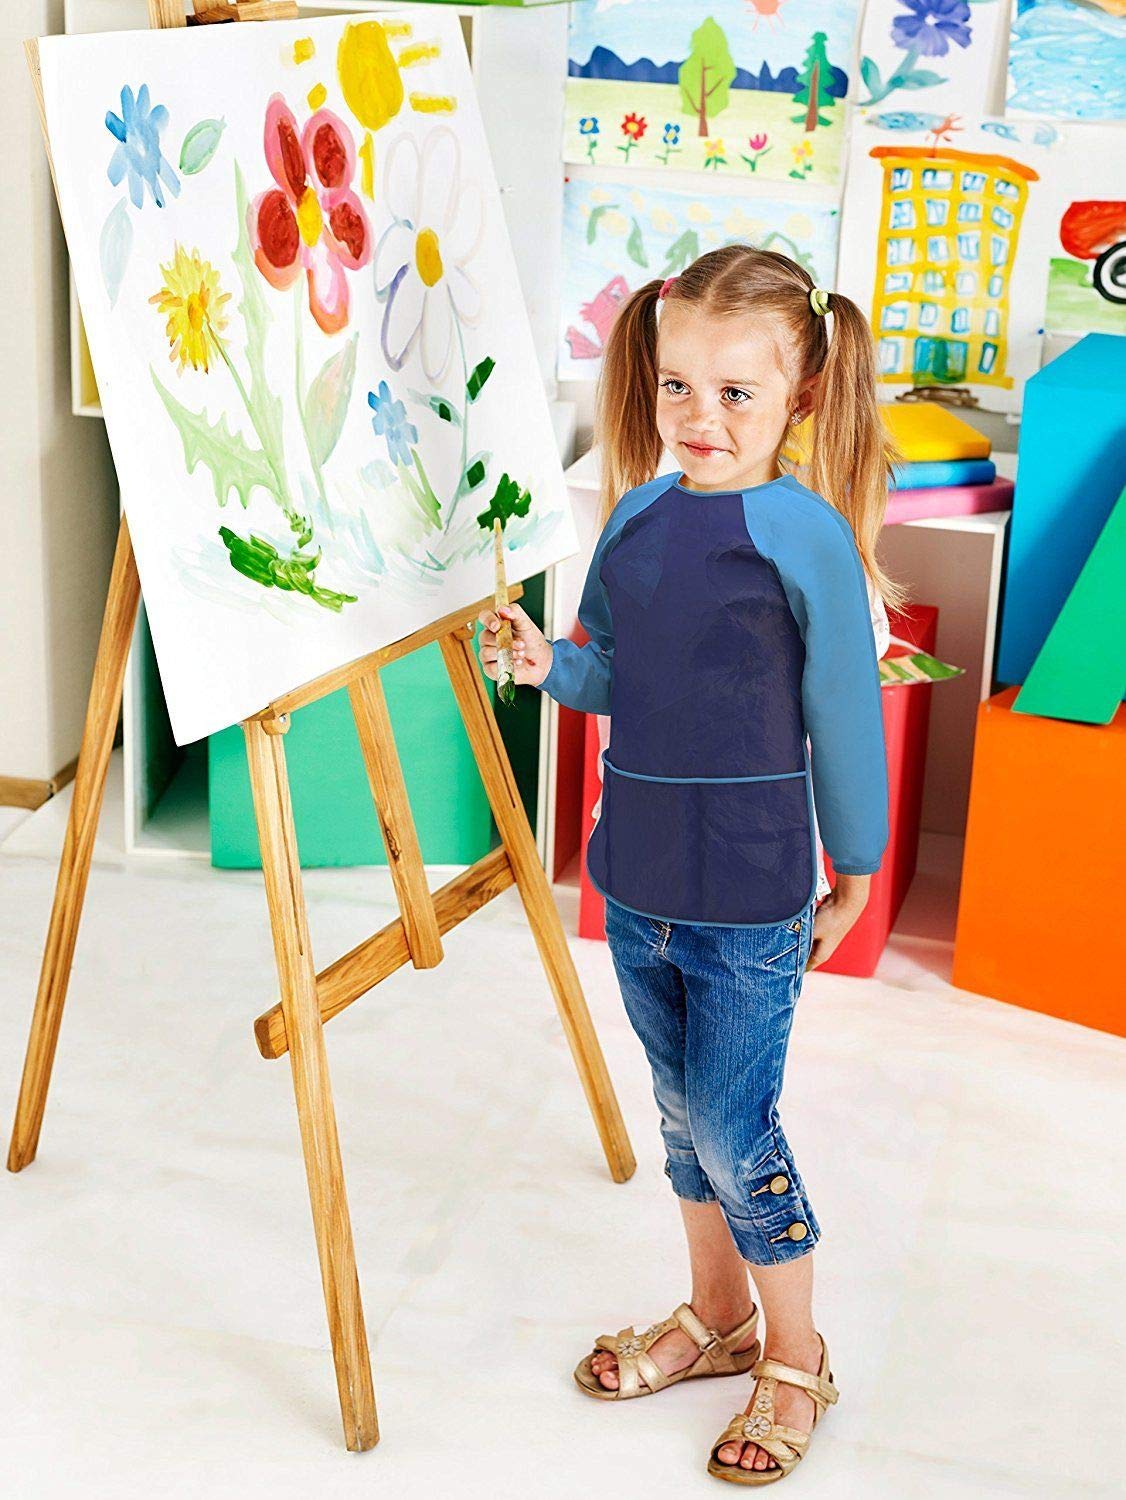 Kids Art Smocks Pack of 2 - Children Artist Painting Aprons Waterproof and Long Sleeve with 3 Roomy Pockets for Boys and Girls Age 2-6 Years Old